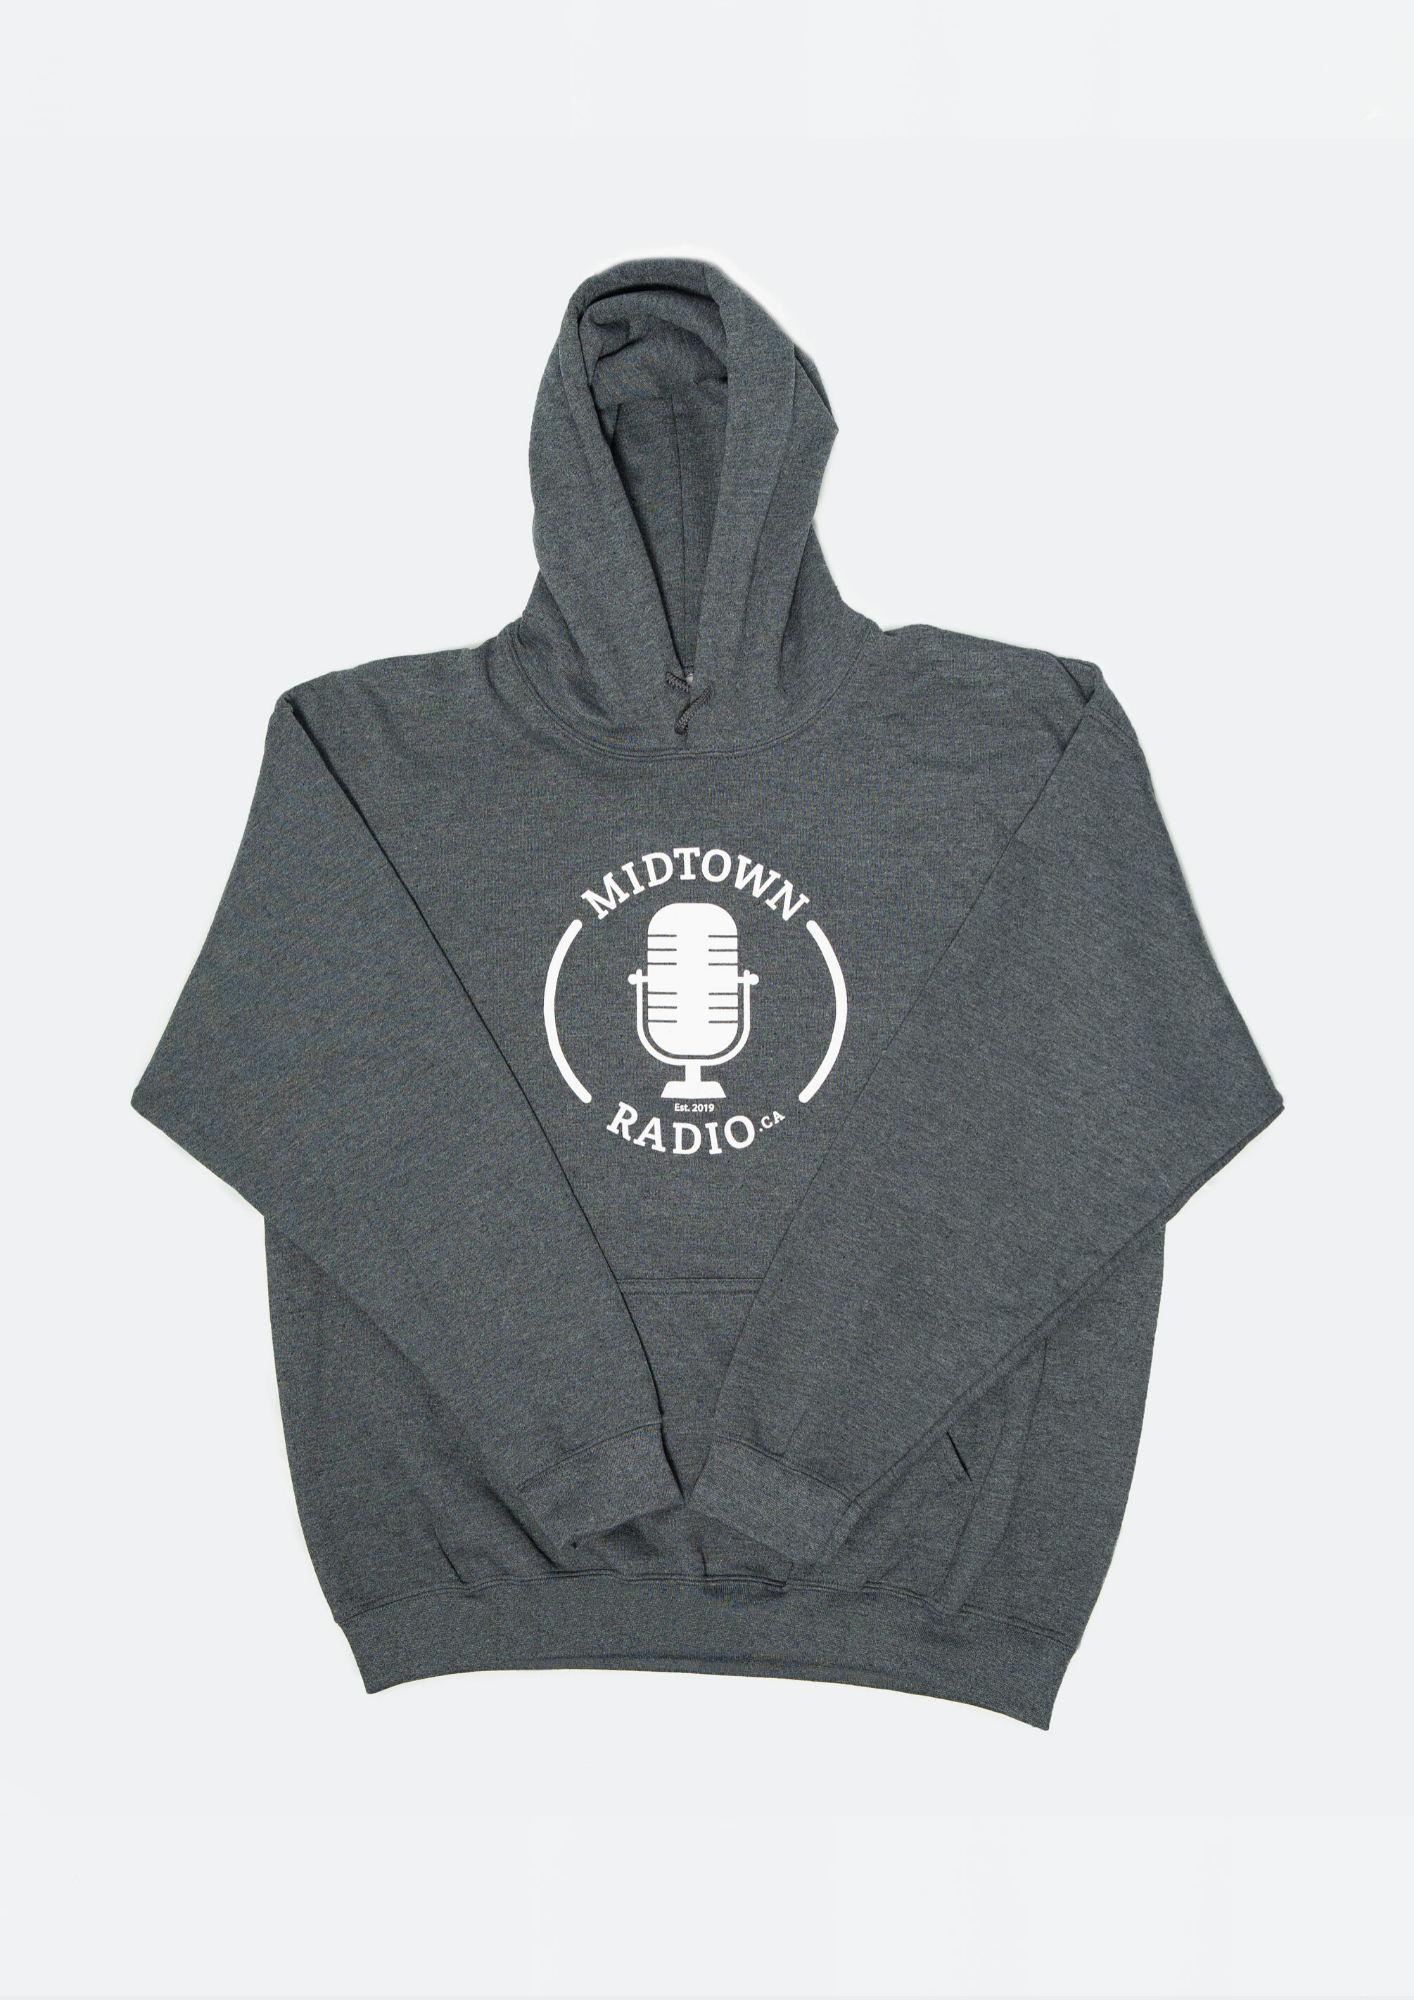 grey hoodie with the 'midtown radio' text and white microphone graphic